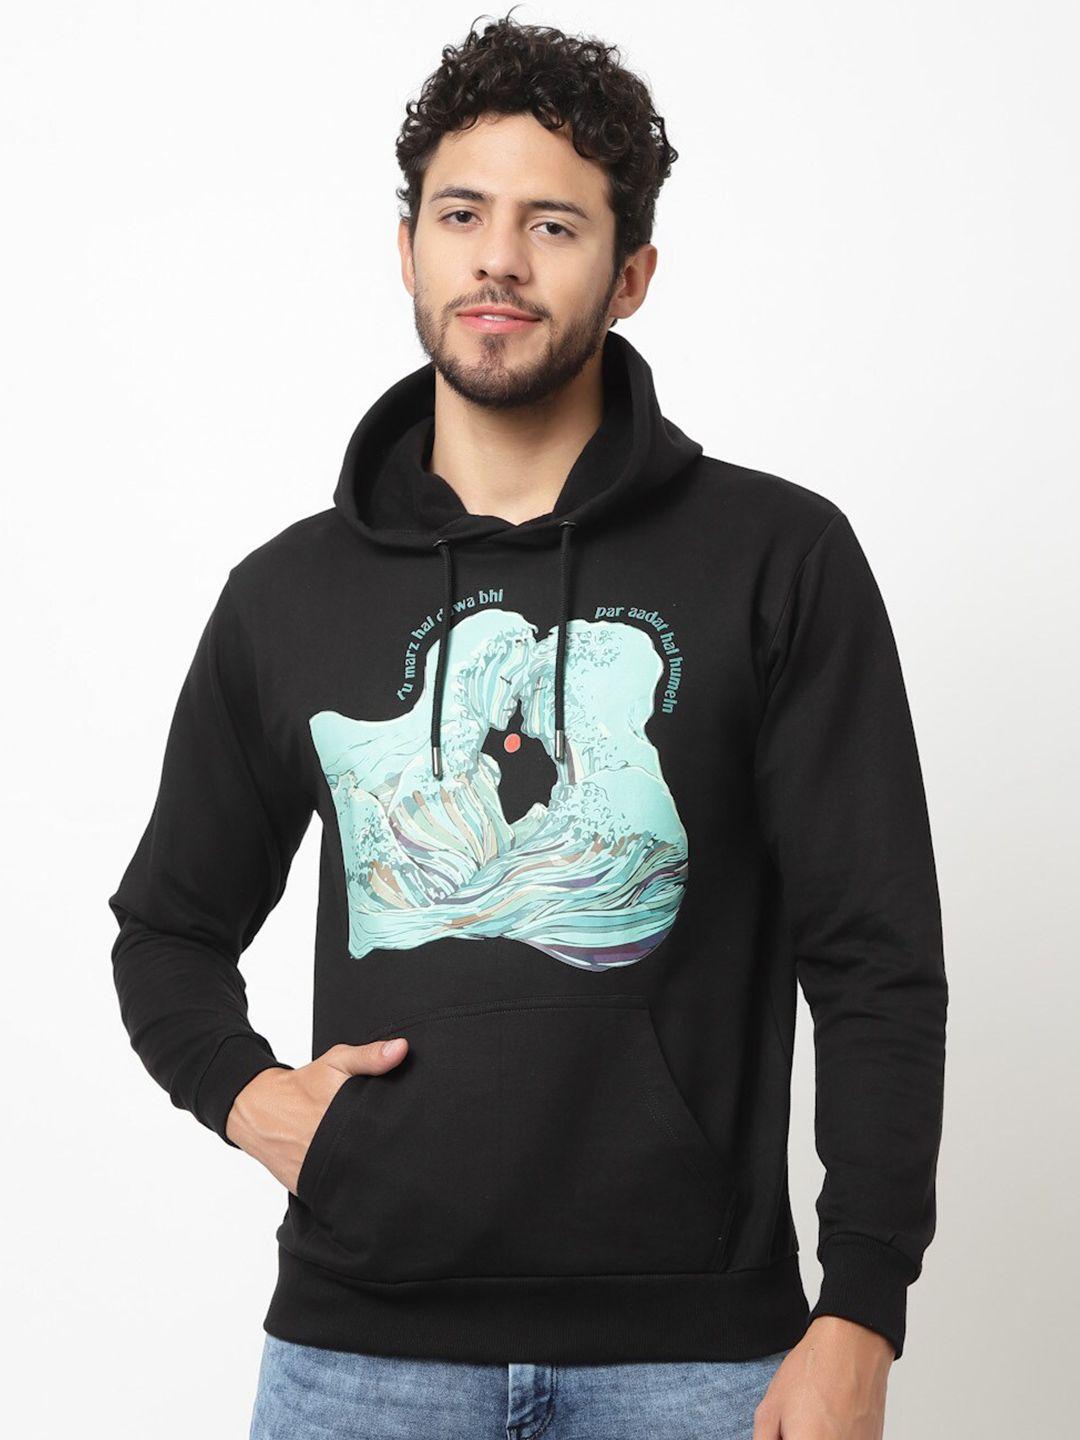 beetein-lamhein-graphic-printed-hooded-pullover